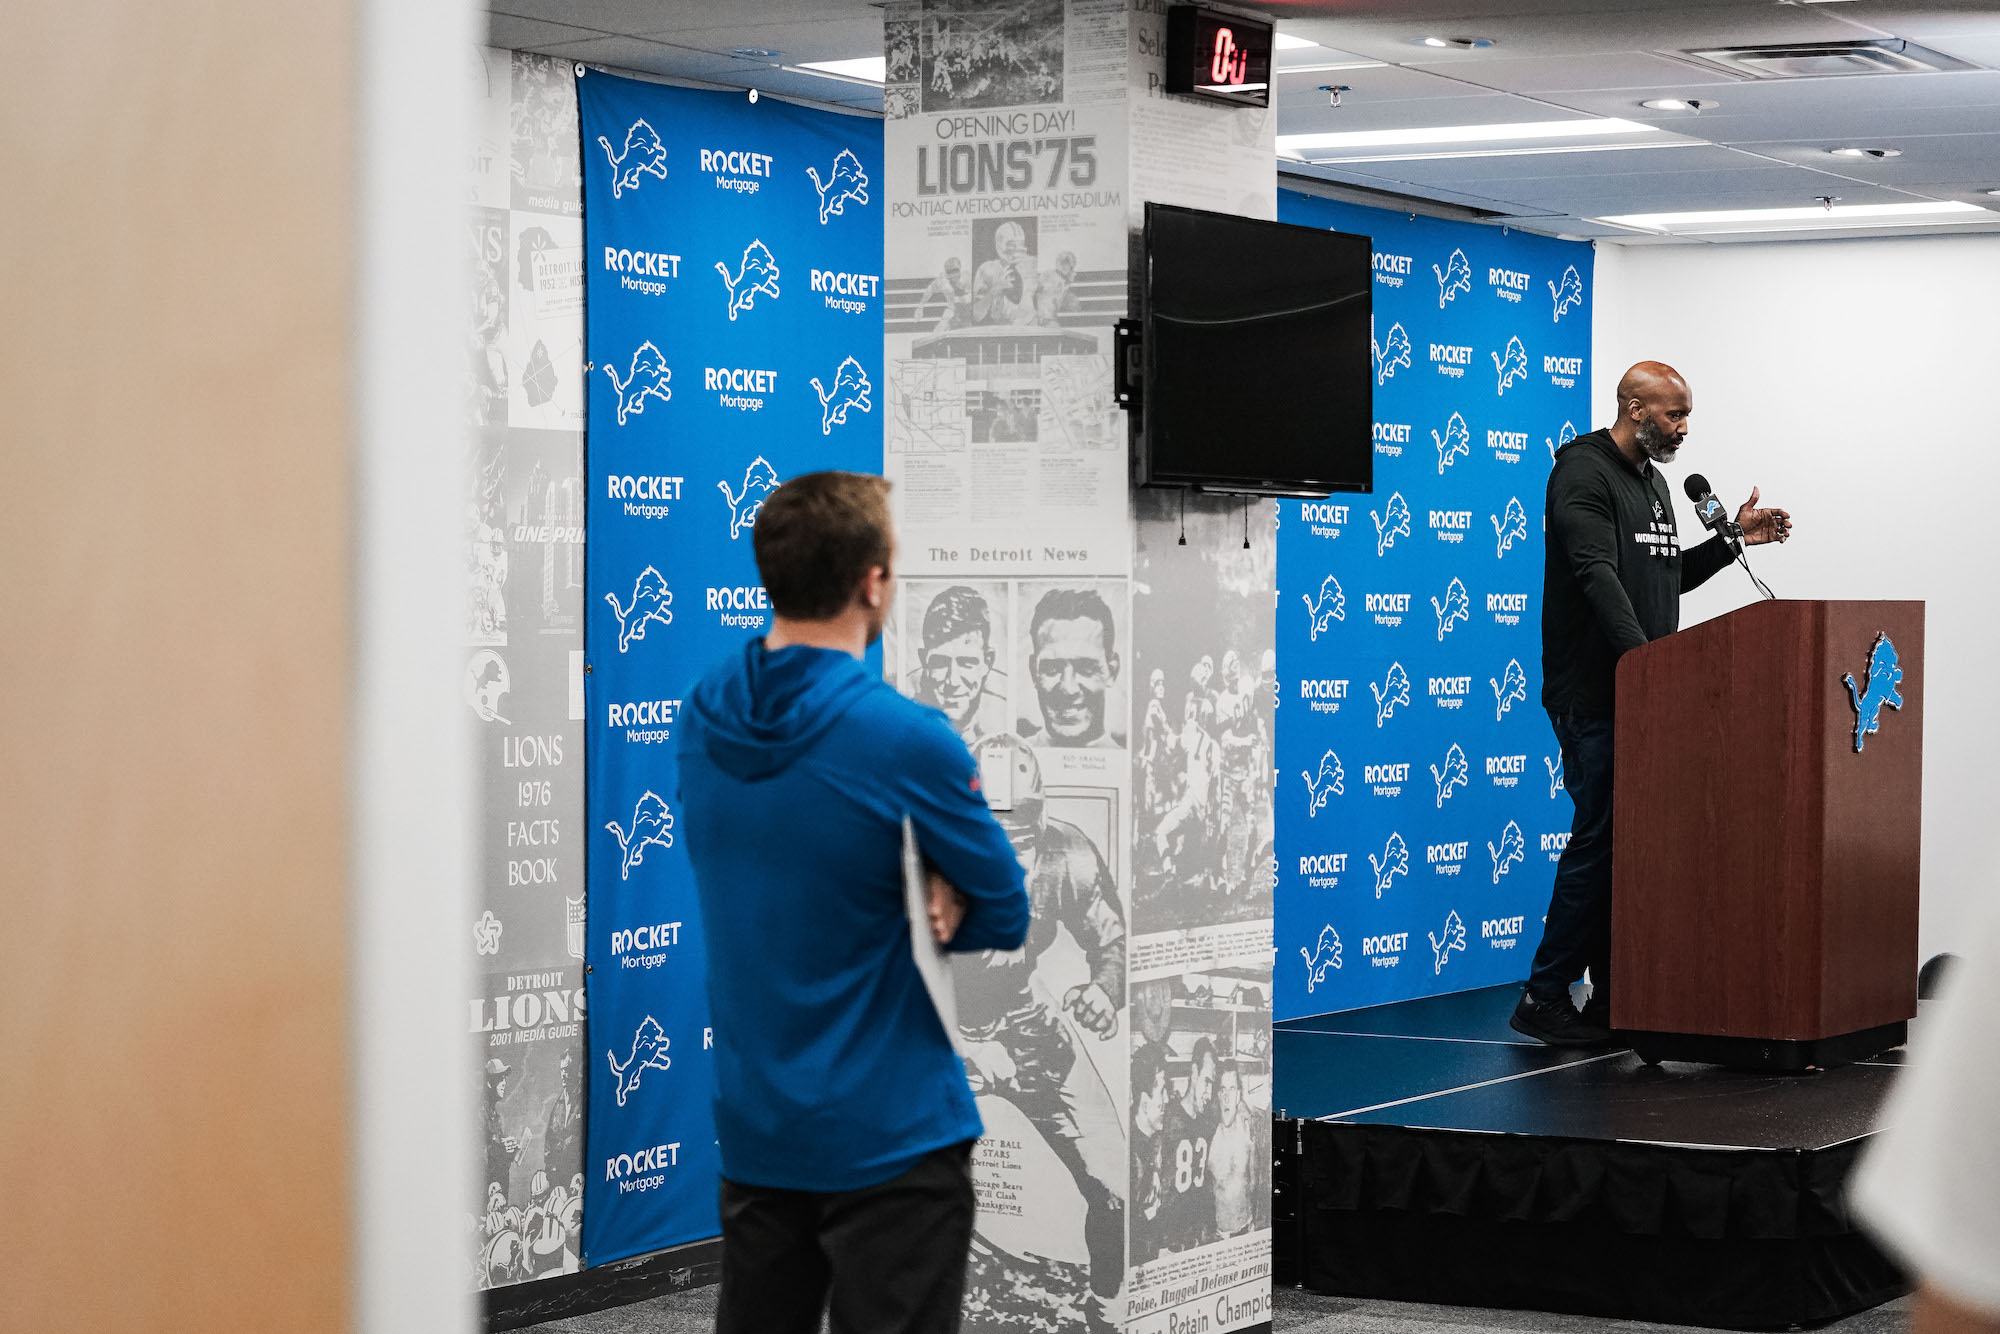 Eamonn Reynolds looks on as Detroit Lions General Manager Brad Holmes hosts a press conference.